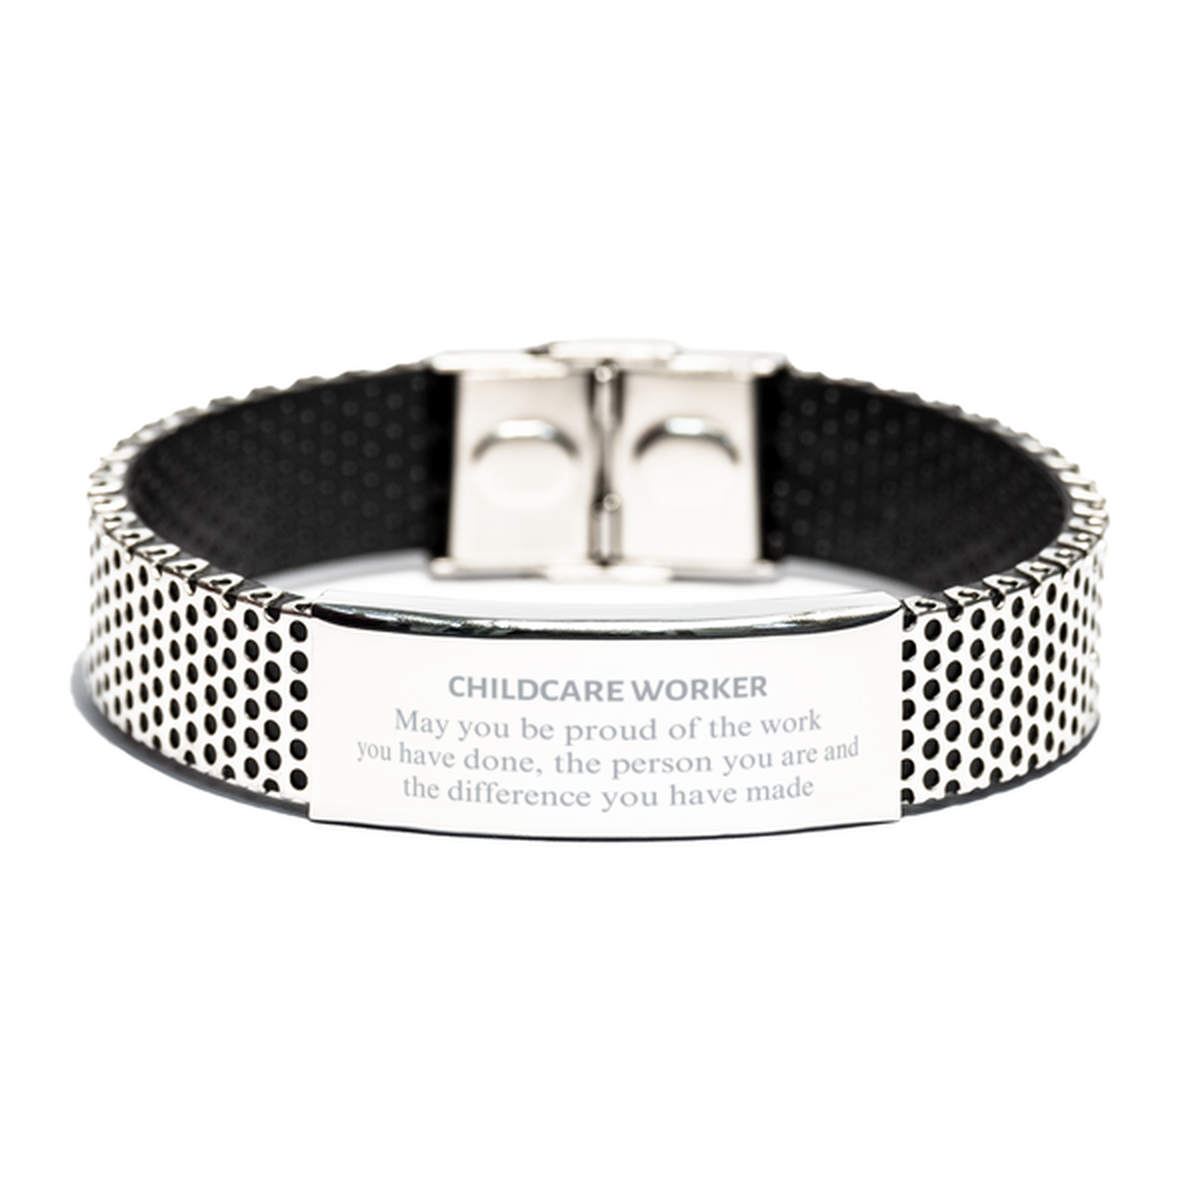 Childcare Worker May you be proud of the work you have done, Retirement Childcare Worker Stainless Steel Bracelet for Colleague Appreciation Gifts Amazing for Childcare Worker